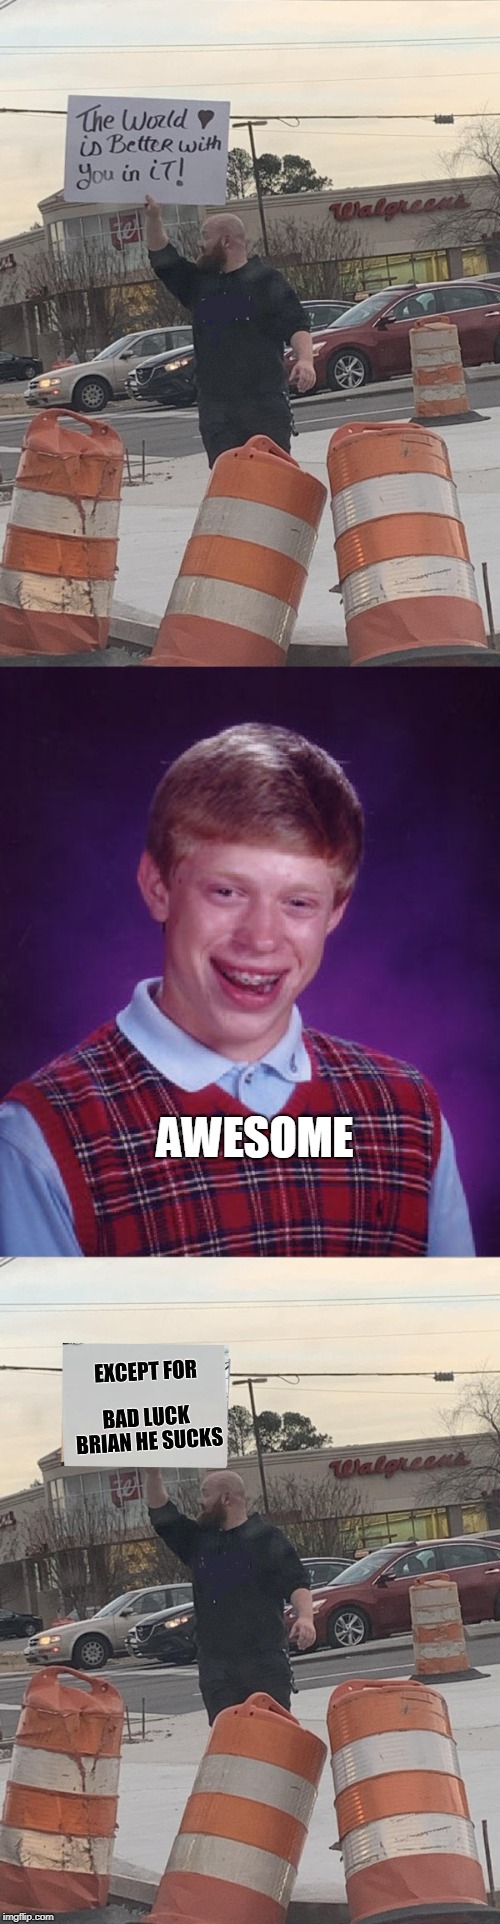 AWESOME | image tagged in memes,bad luck brian | made w/ Imgflip meme maker